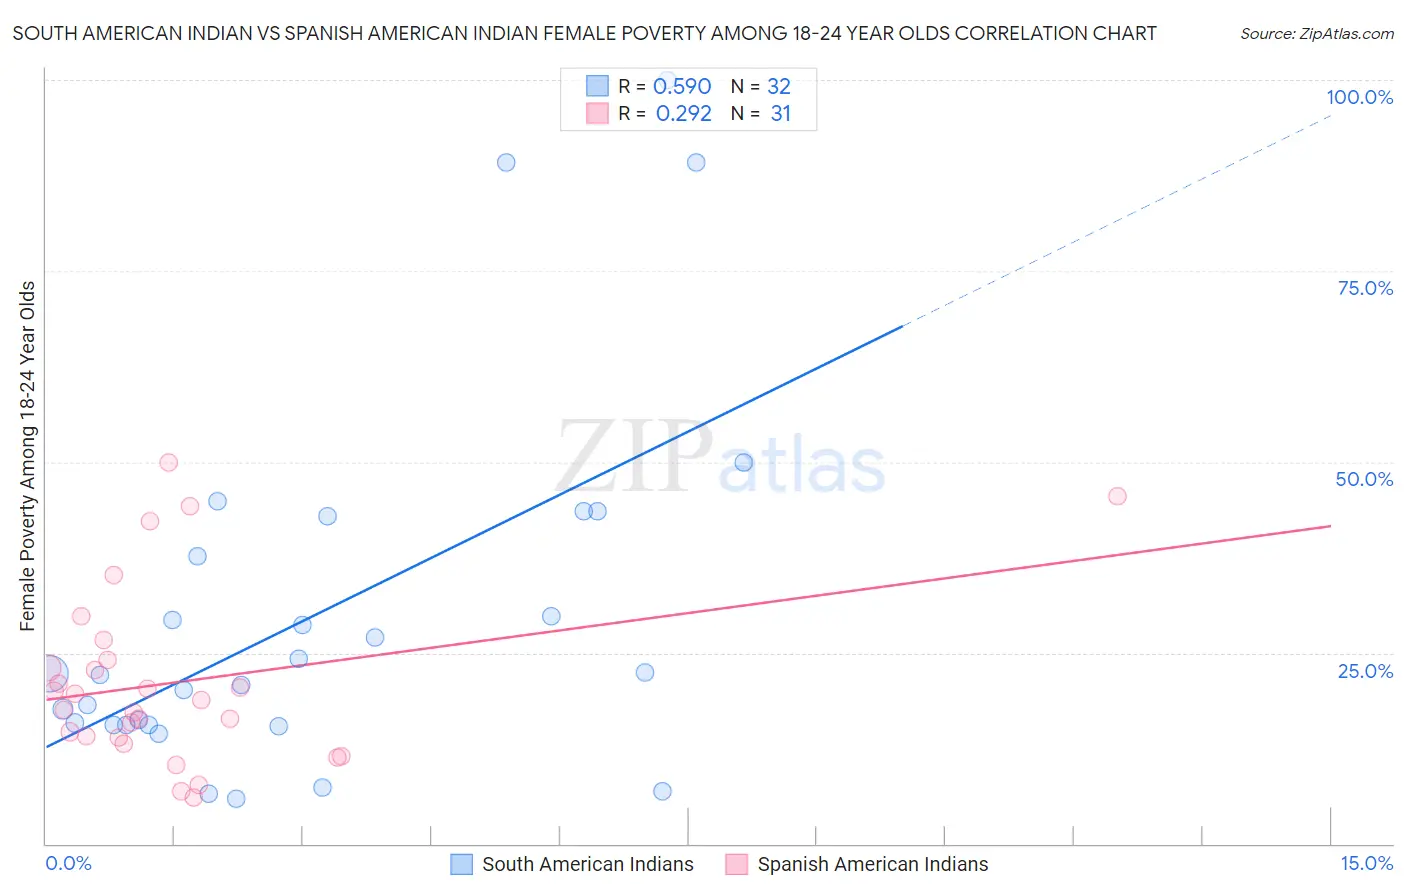 South American Indian vs Spanish American Indian Female Poverty Among 18-24 Year Olds